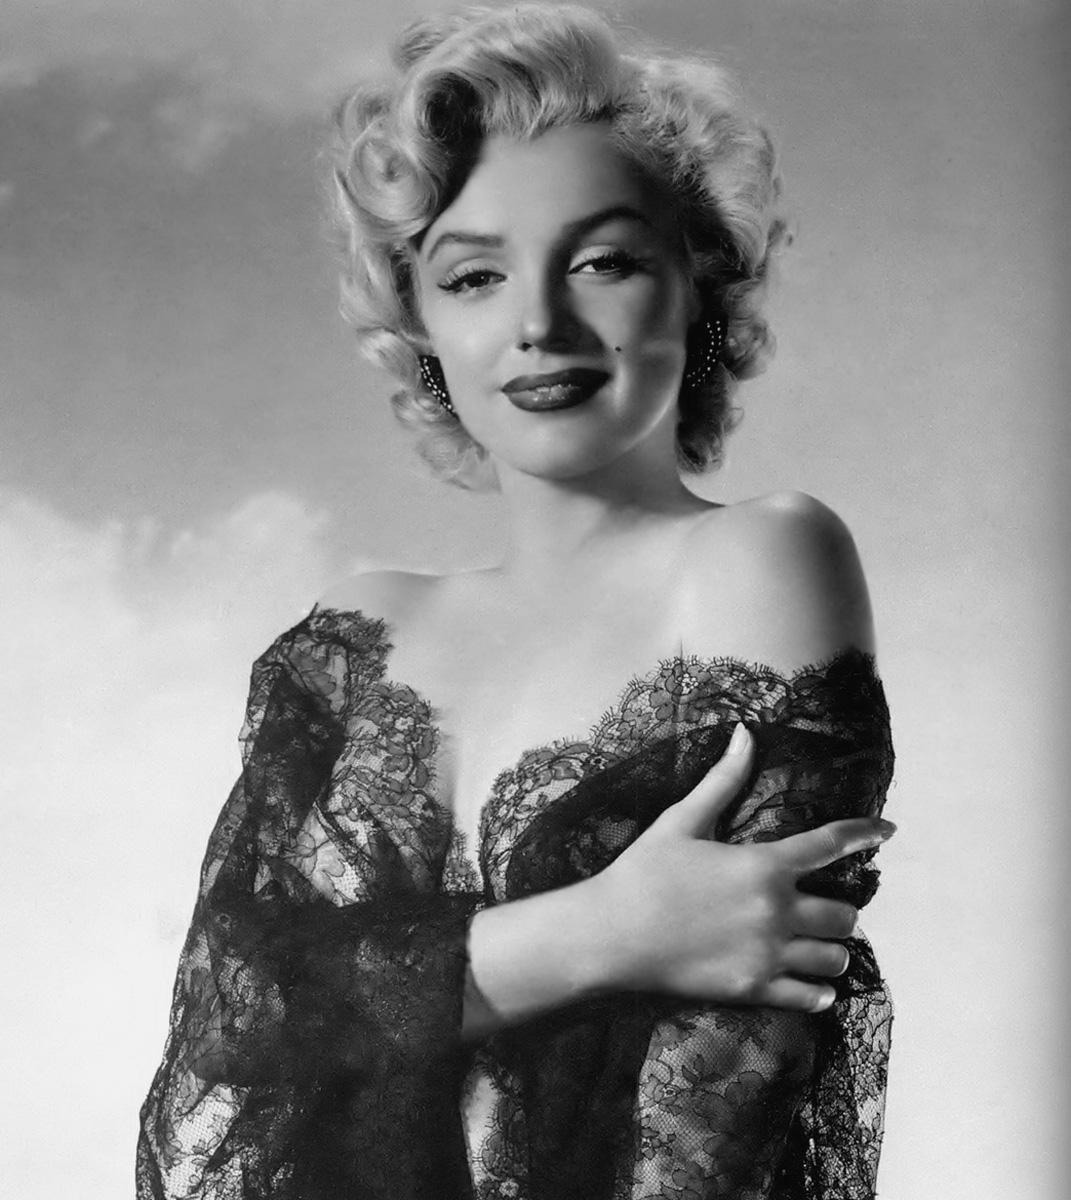 wjs59:  Ann Sothern, Ingrid Bergman, Daun Kennedy, Orson Welles, Fred Astaire and